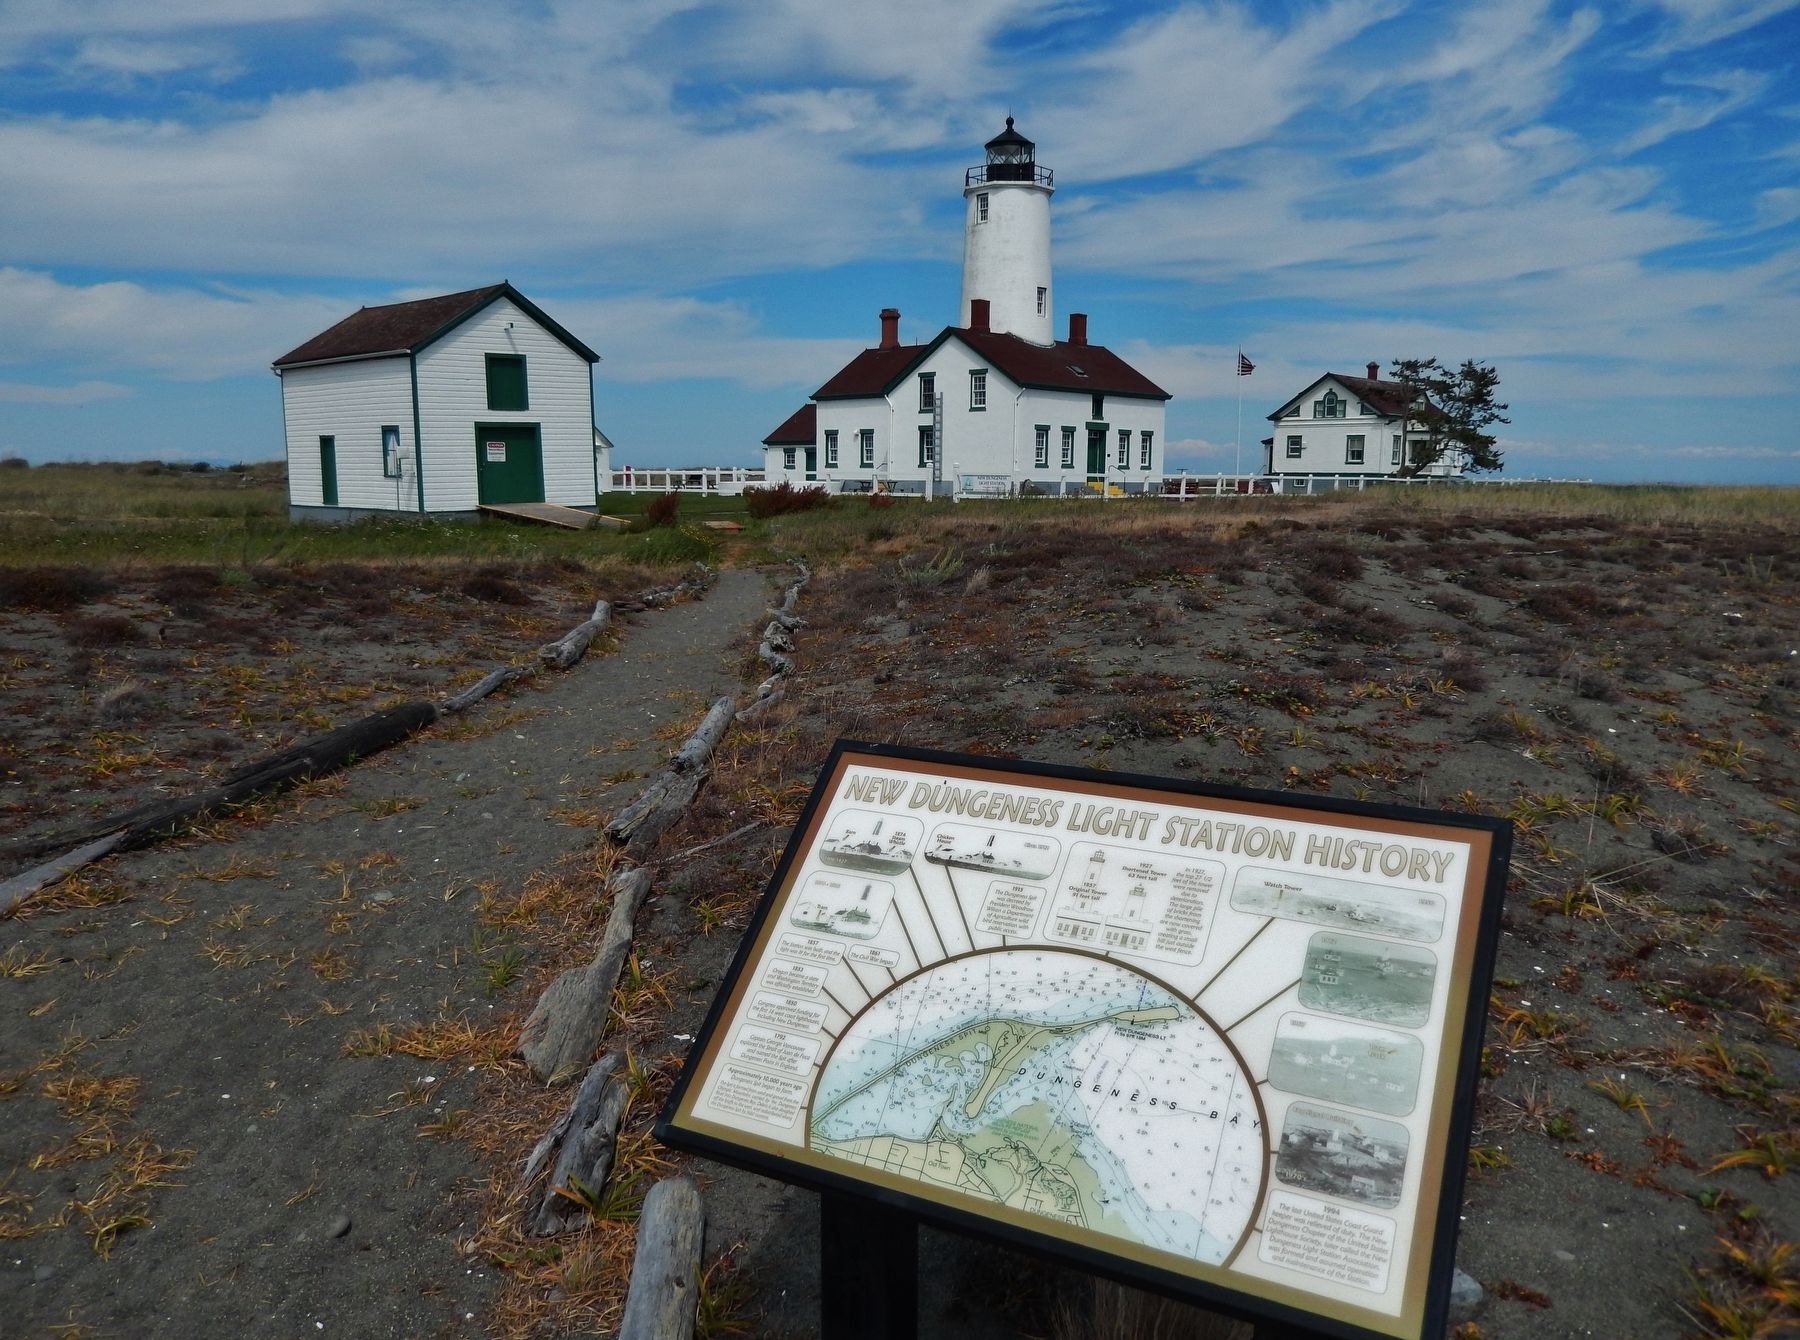 New Dungeness Light Station History Marker (<b><i>wide view</b></i>) image. Click for full size.